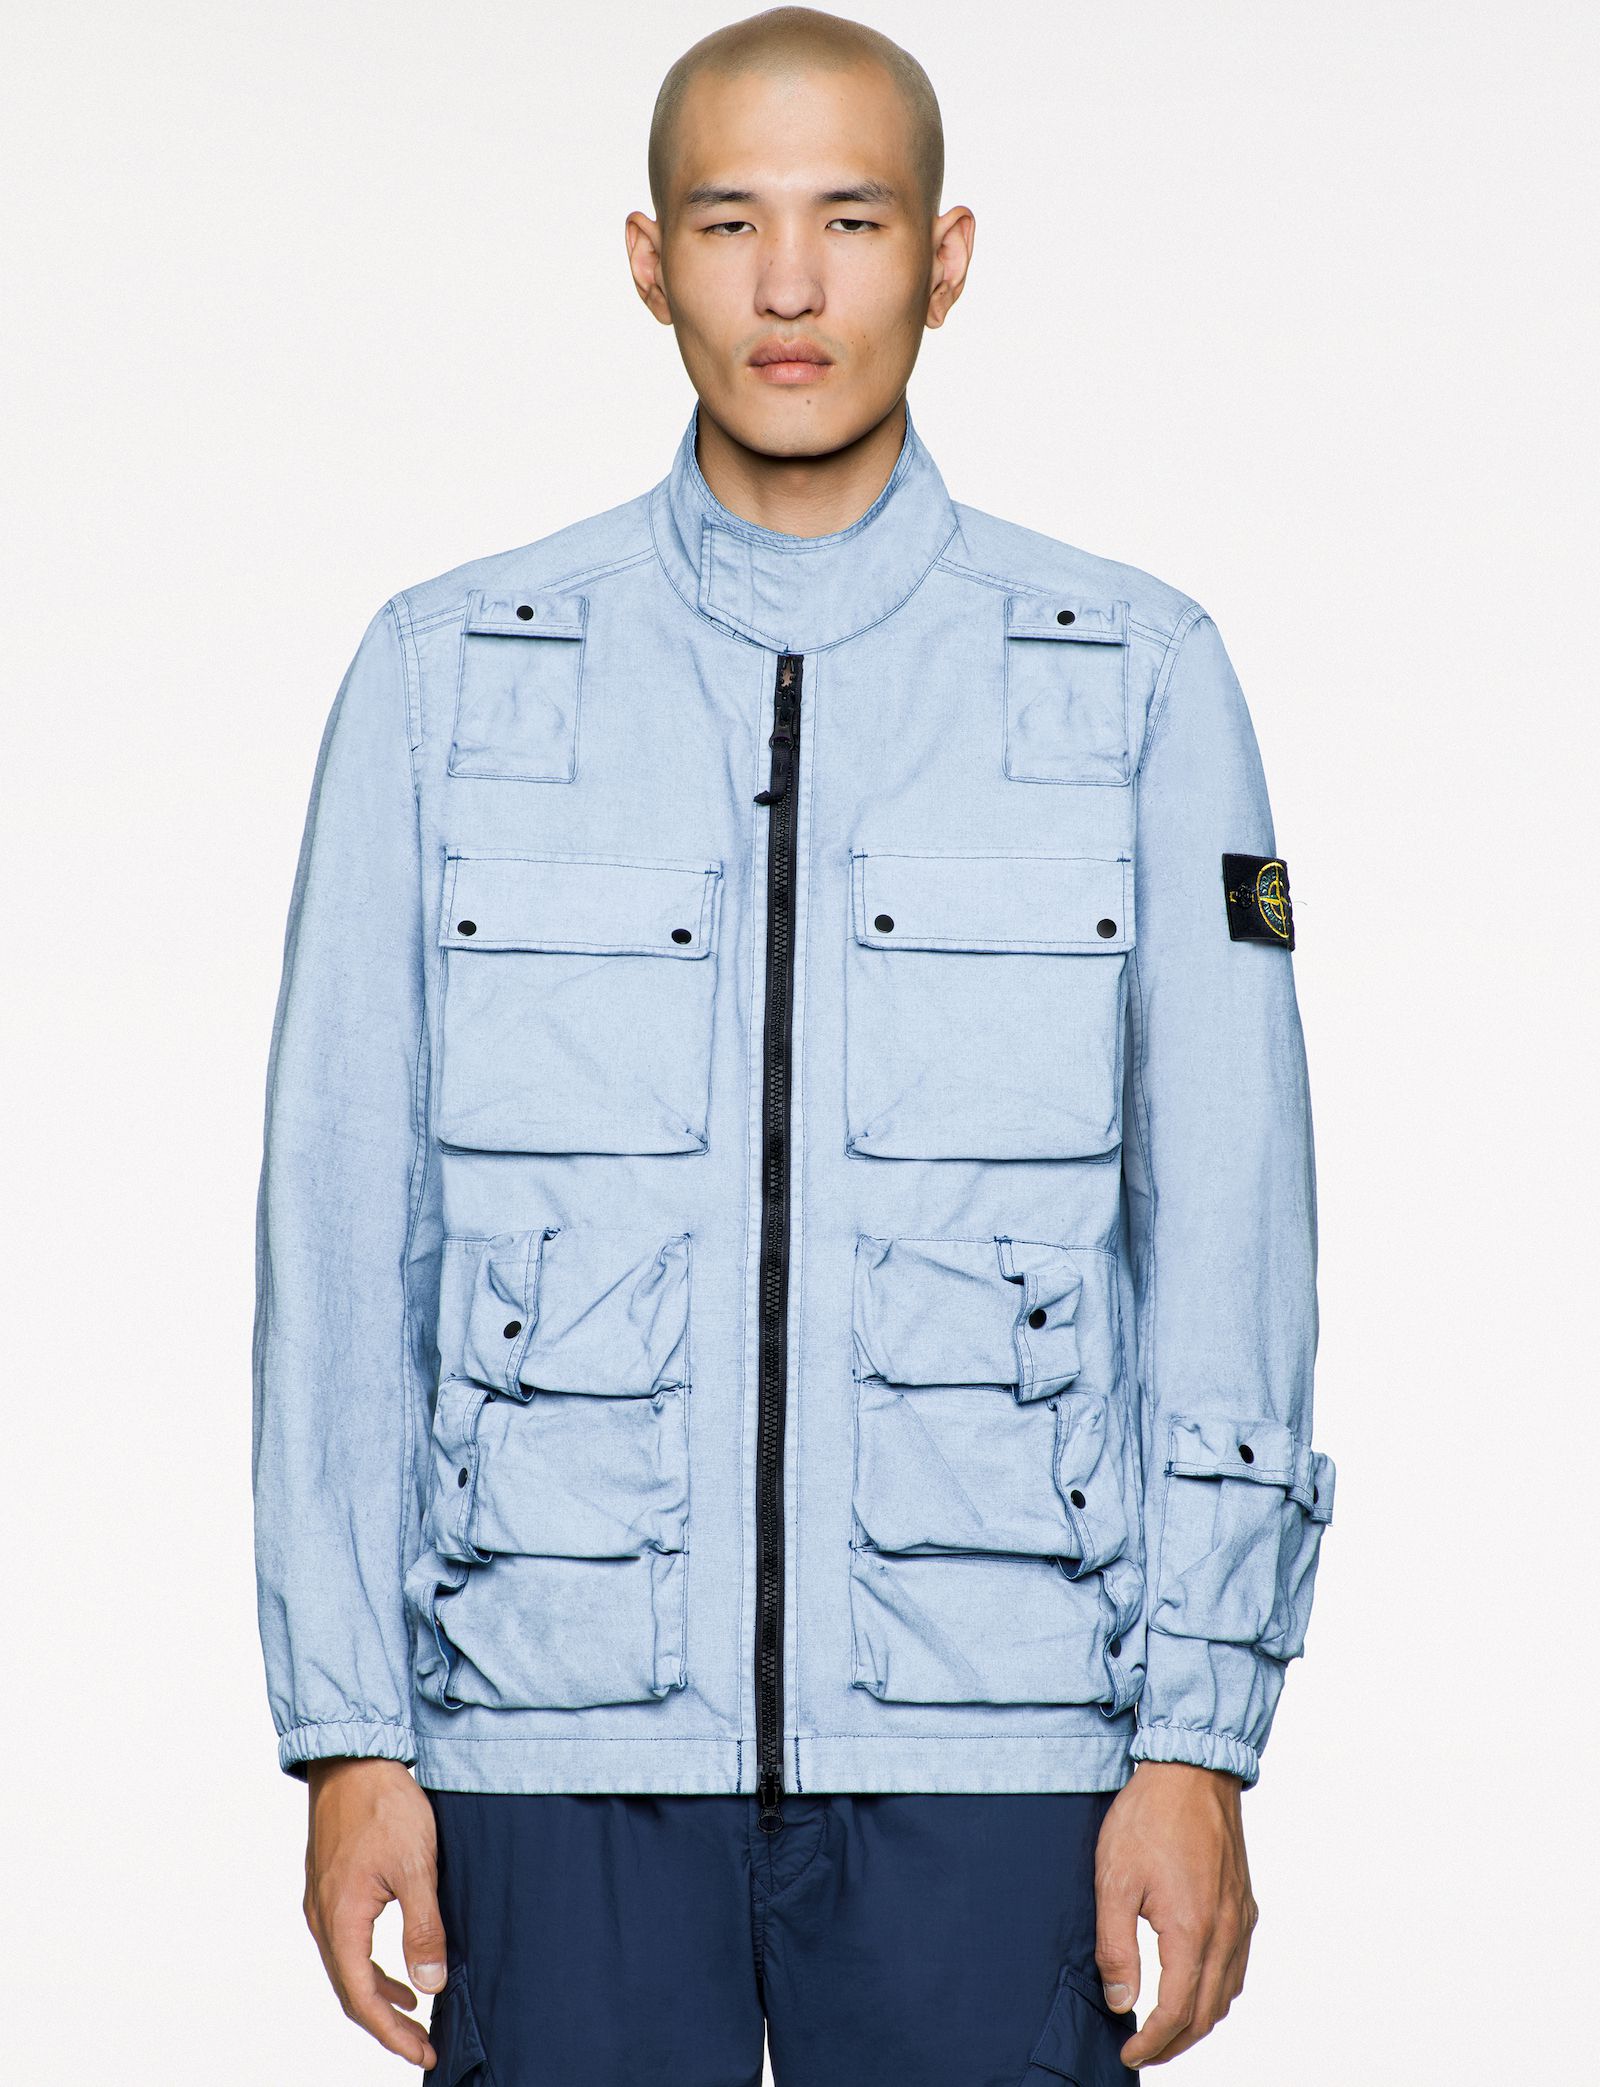 Functionality returns in 2019 with the Stone Island SS/19 preview - ICON